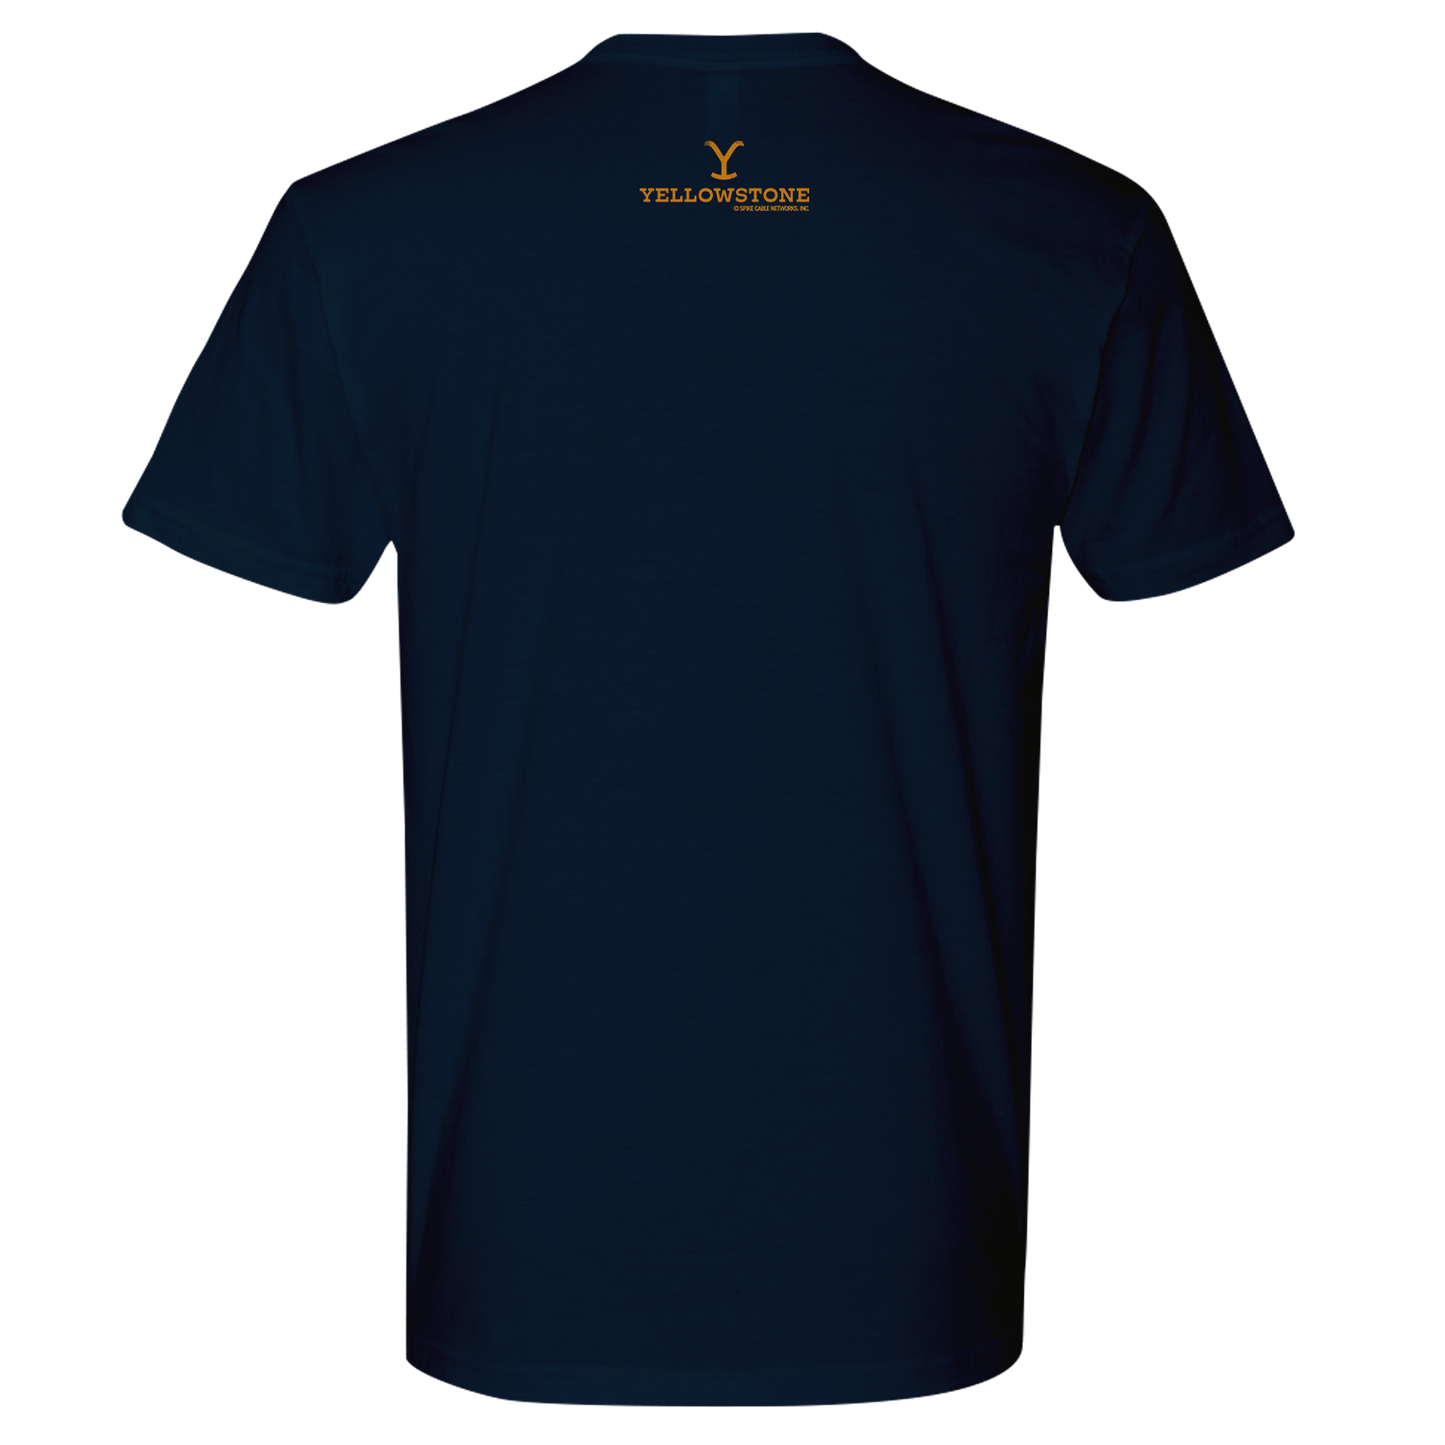 Yellowstone Keep Moving Unless You Are Rip Adult Short Sleeve T - Shirt - Paramount Shop